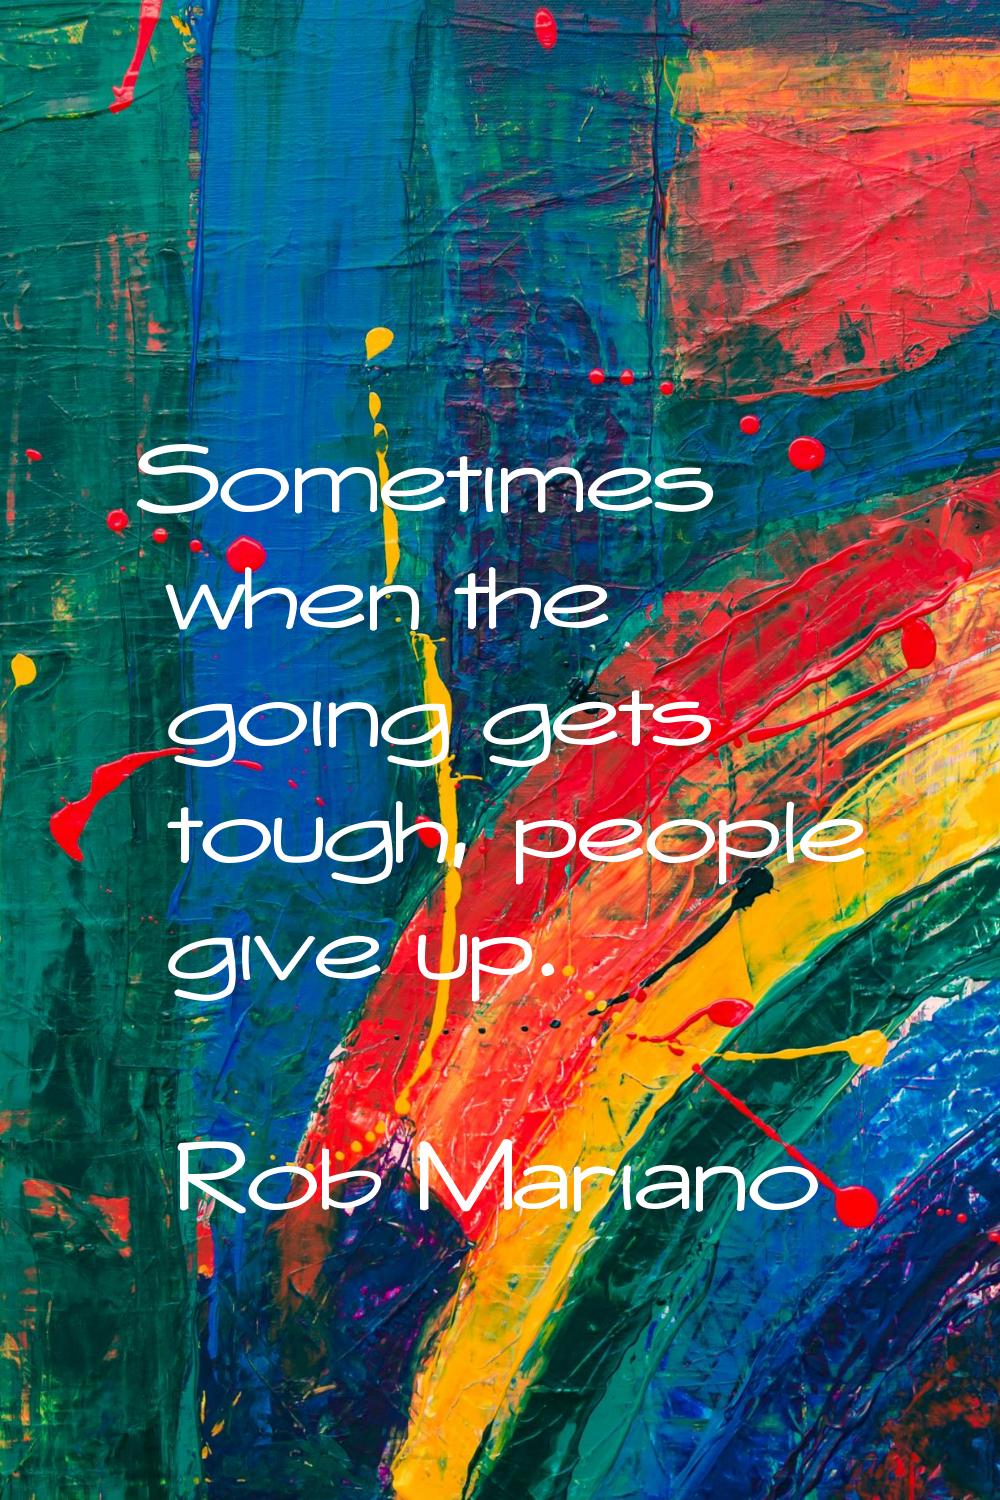 Sometimes when the going gets tough, people give up.